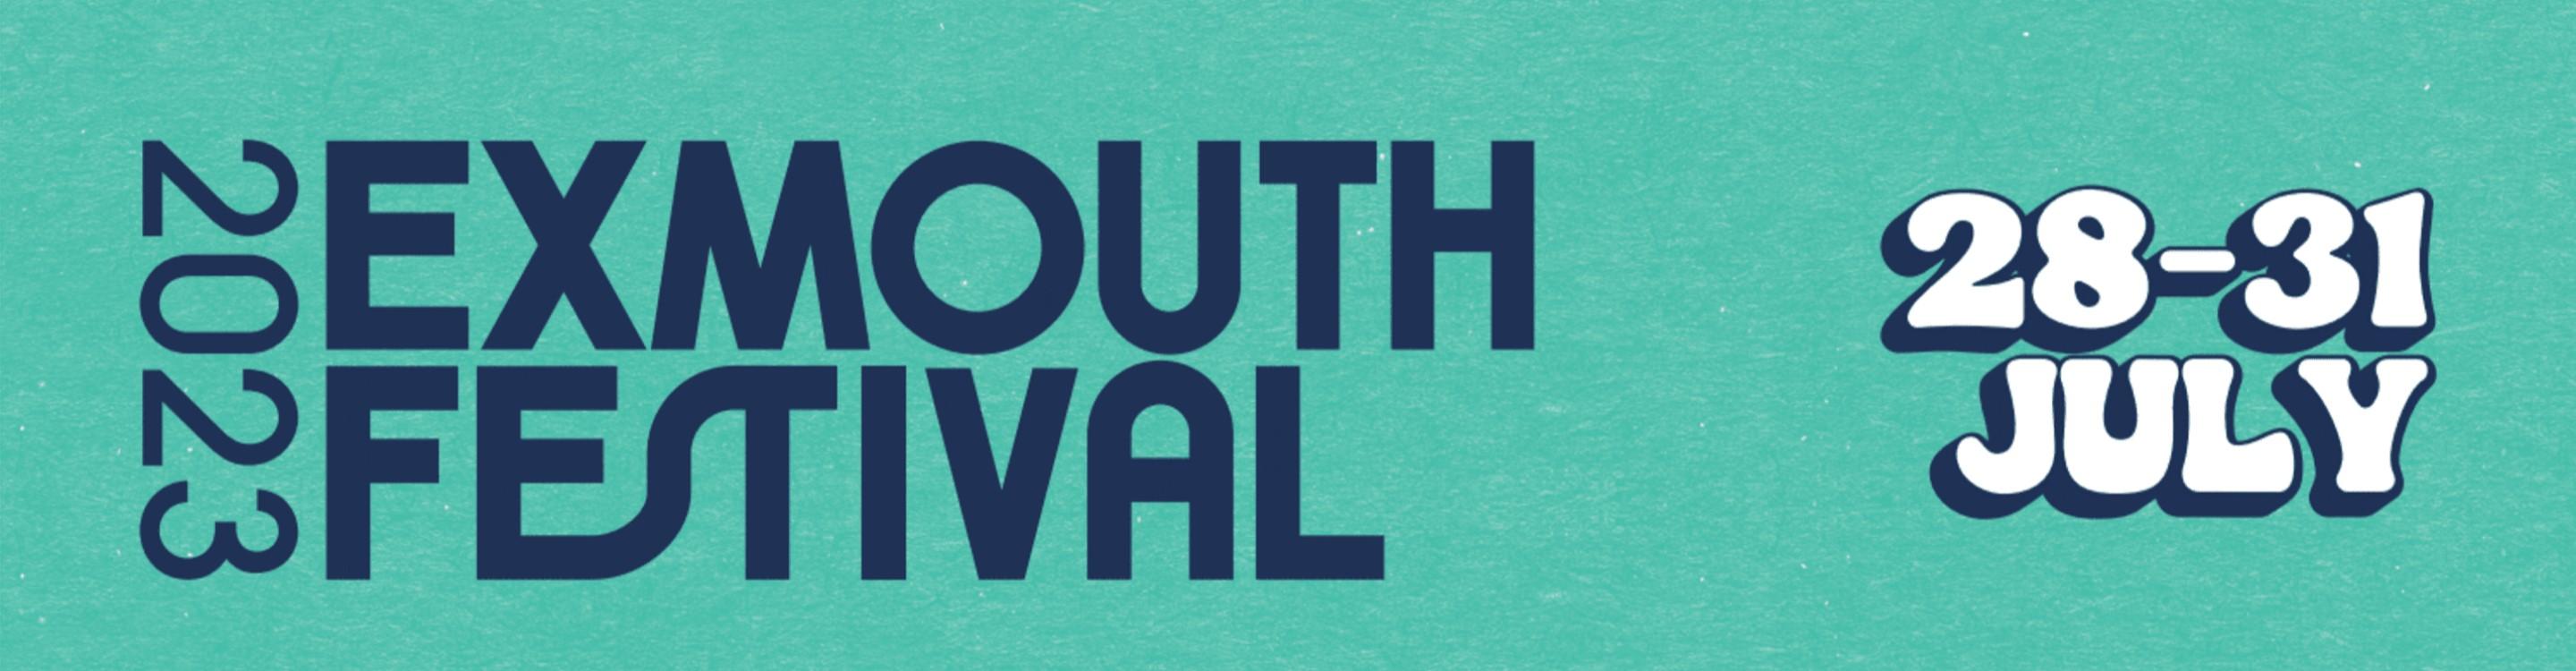 Exmouth Festival 2023 from 28 to 31 July